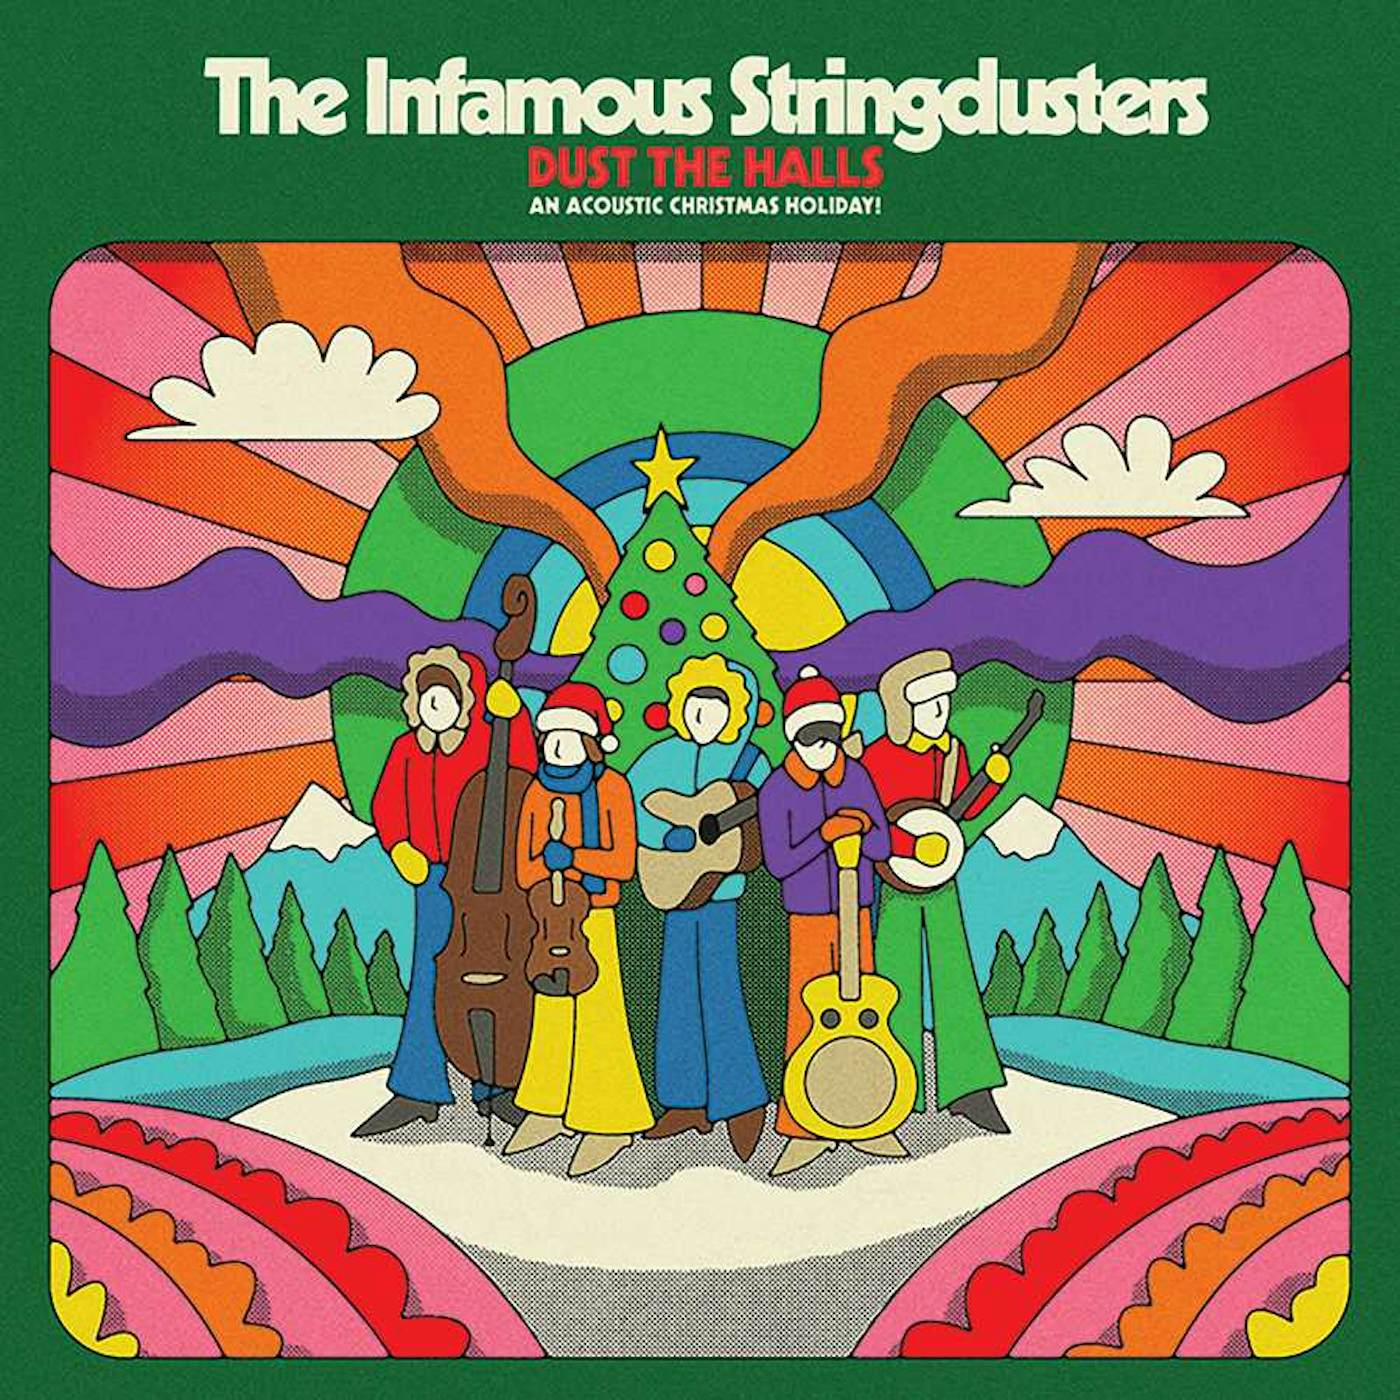 The Infamous Stringdusters Dust the Halls: An Acoustic Christmas Holiday! Vinyl Record